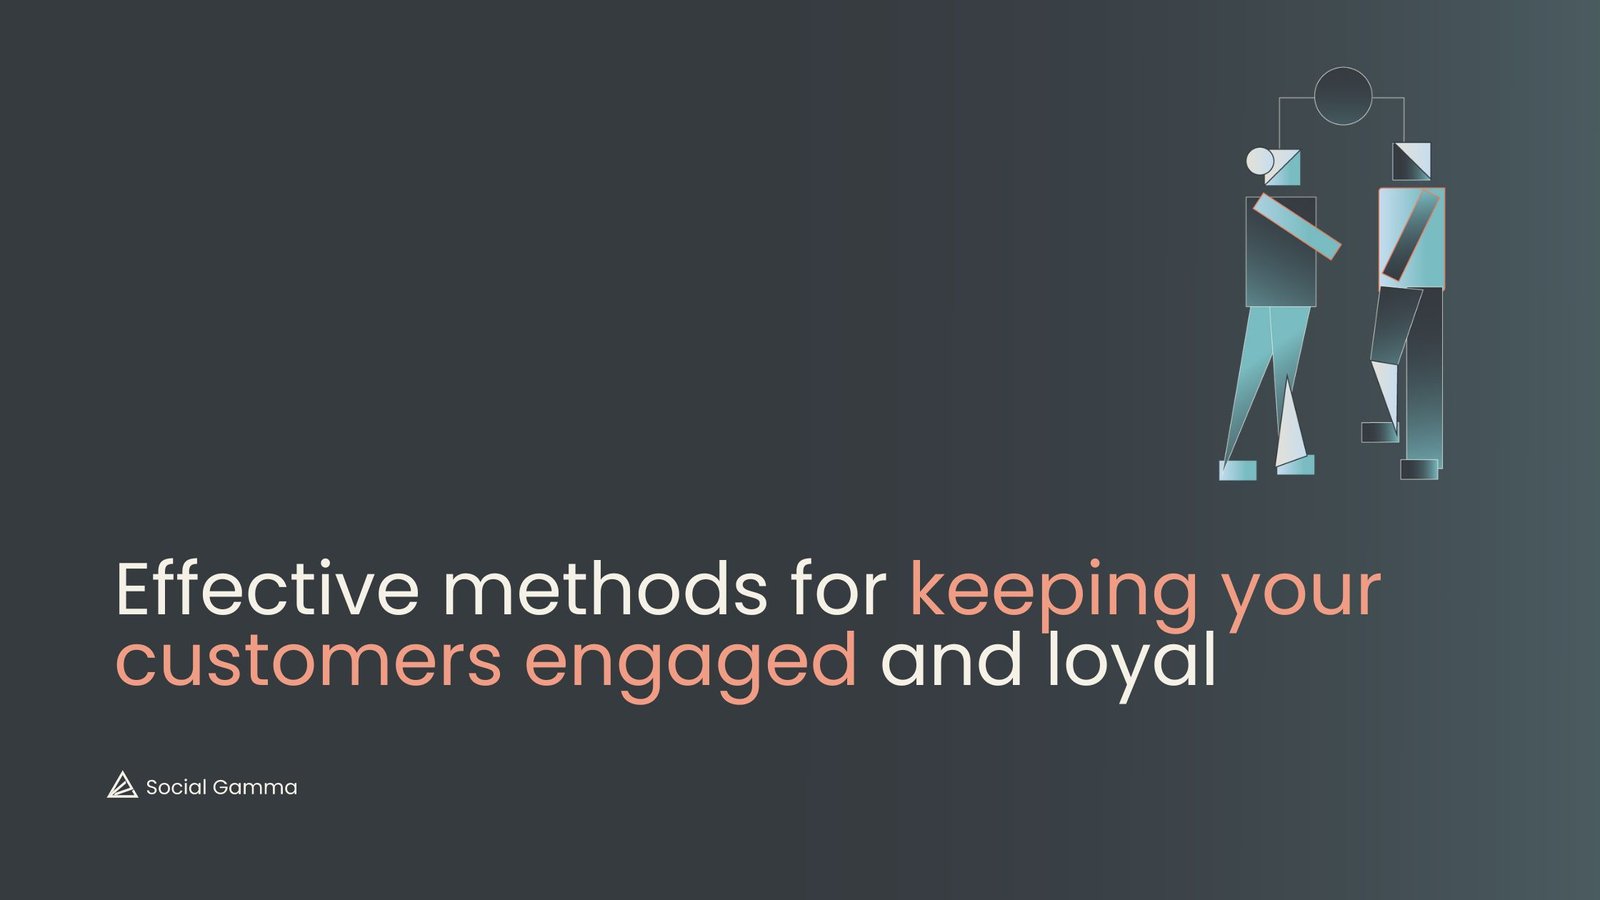 Customer Retention - Effective methods for keeping your customers engaged and loyal